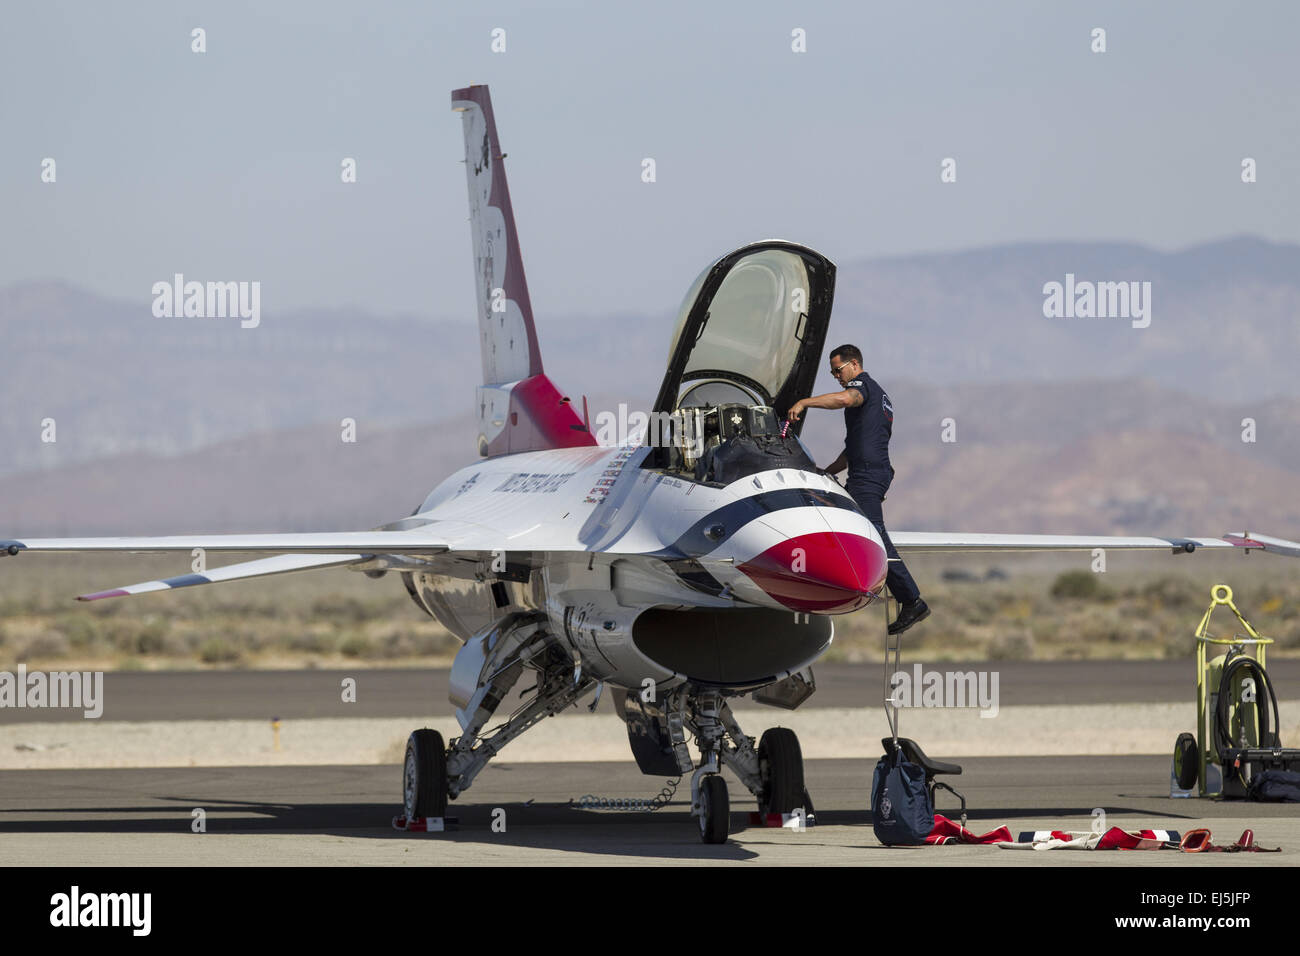 Los Angeles, California, USA. 21st Mar, 2015. An U.S. Air Force Thunderbirds officer examins a F-16 Fighting Falcon before the performance during Los Angeles County Air Show in Lancaster, California on March 21, 2015. Credit:  Ringo Chiu/ZUMA Wire/Alamy Live News Stock Photo